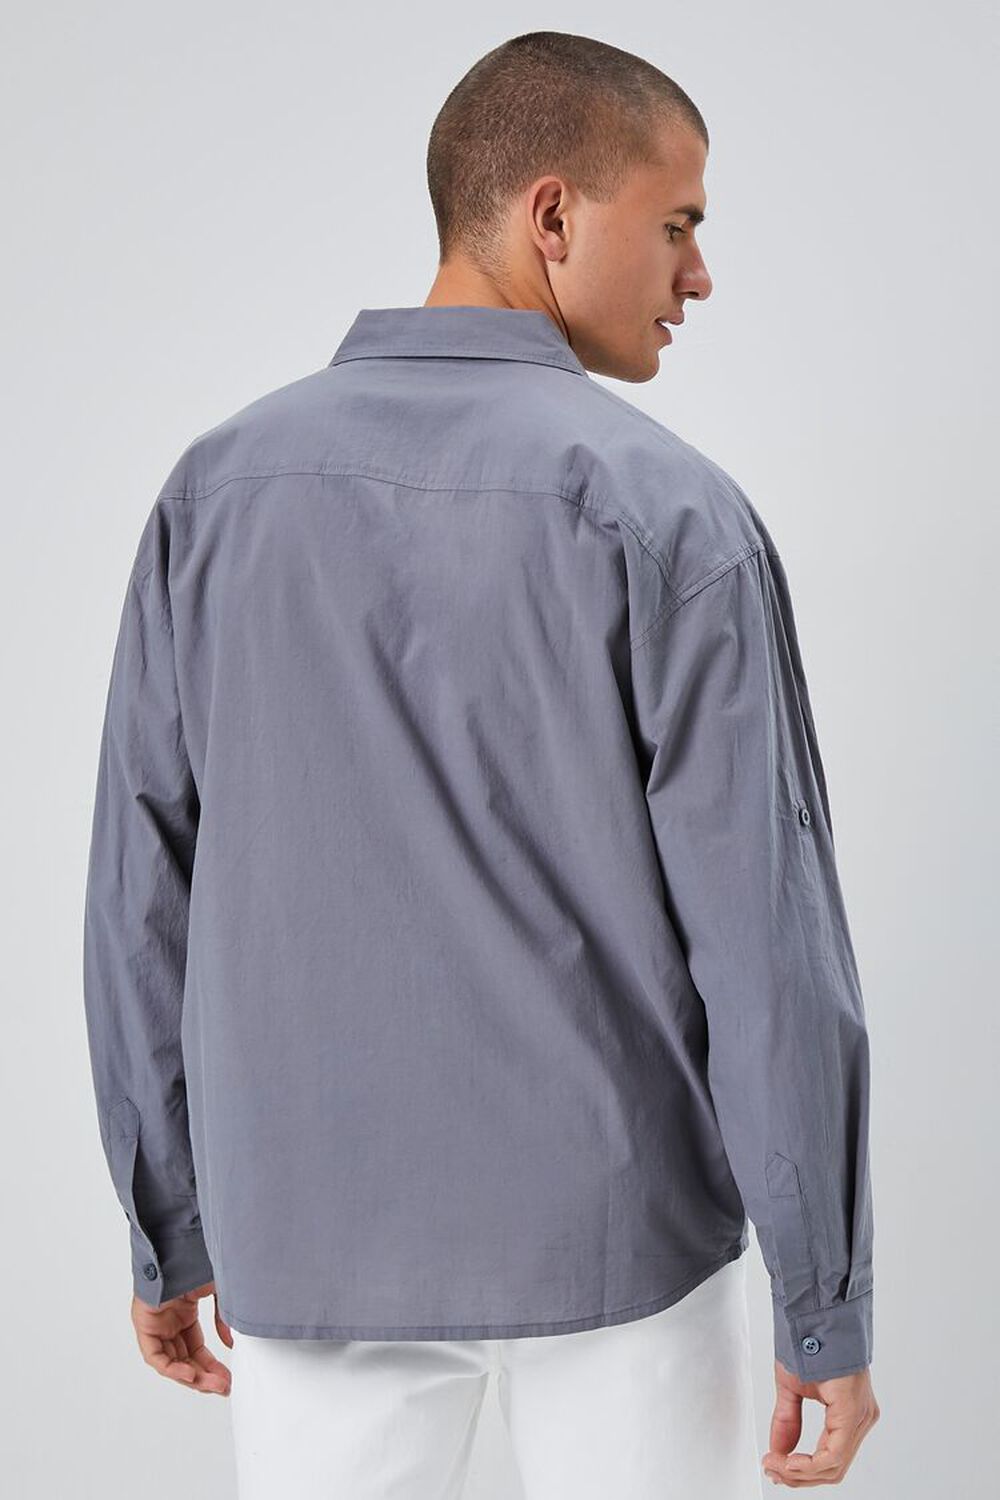 Long-Sleeve Buttoned Shirt, image 3